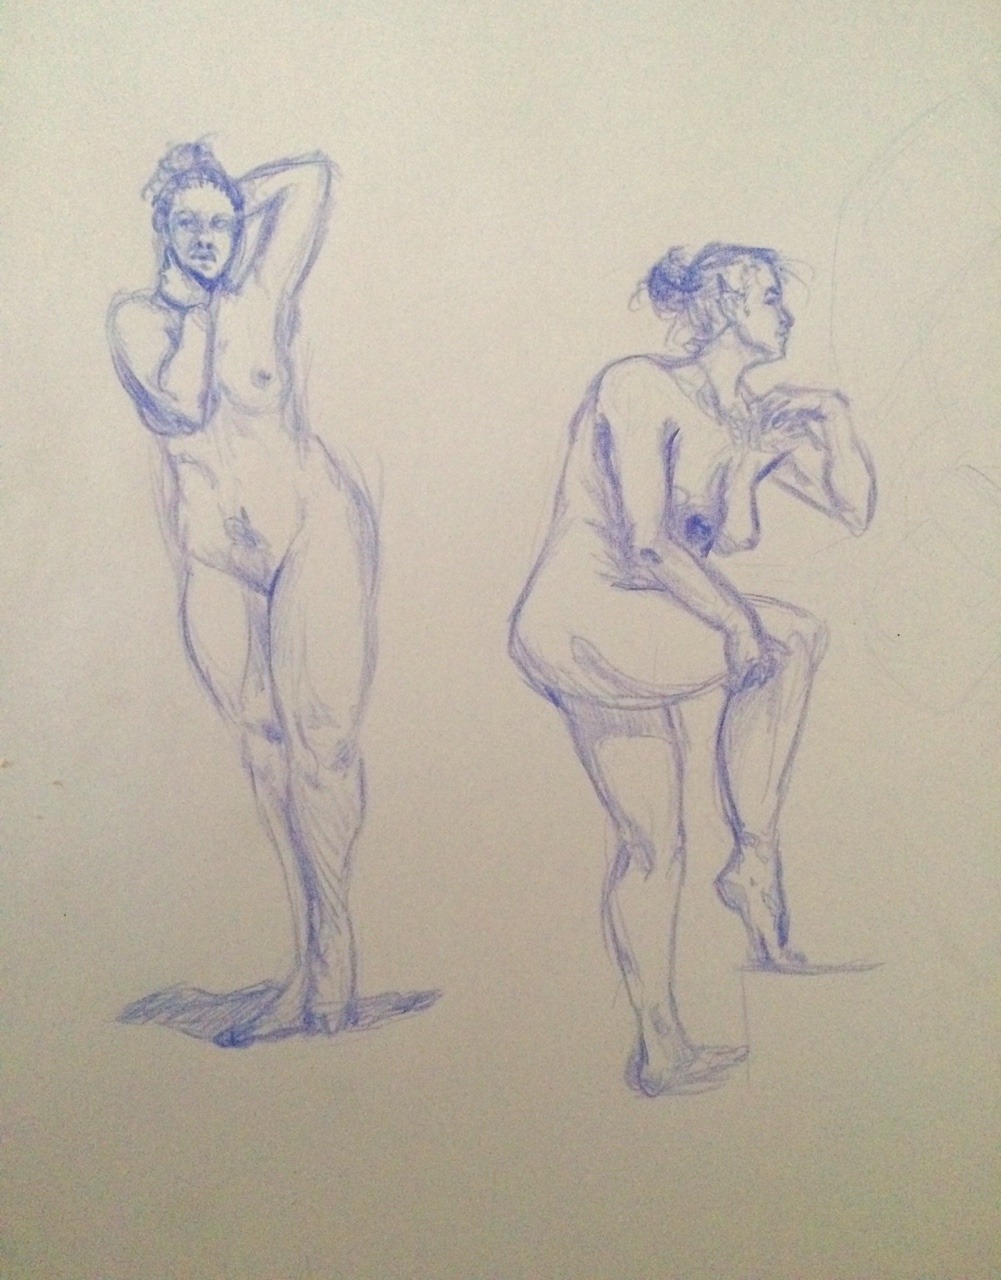 I&rsquo;m trying to practice at figure drawing before I go and take my first